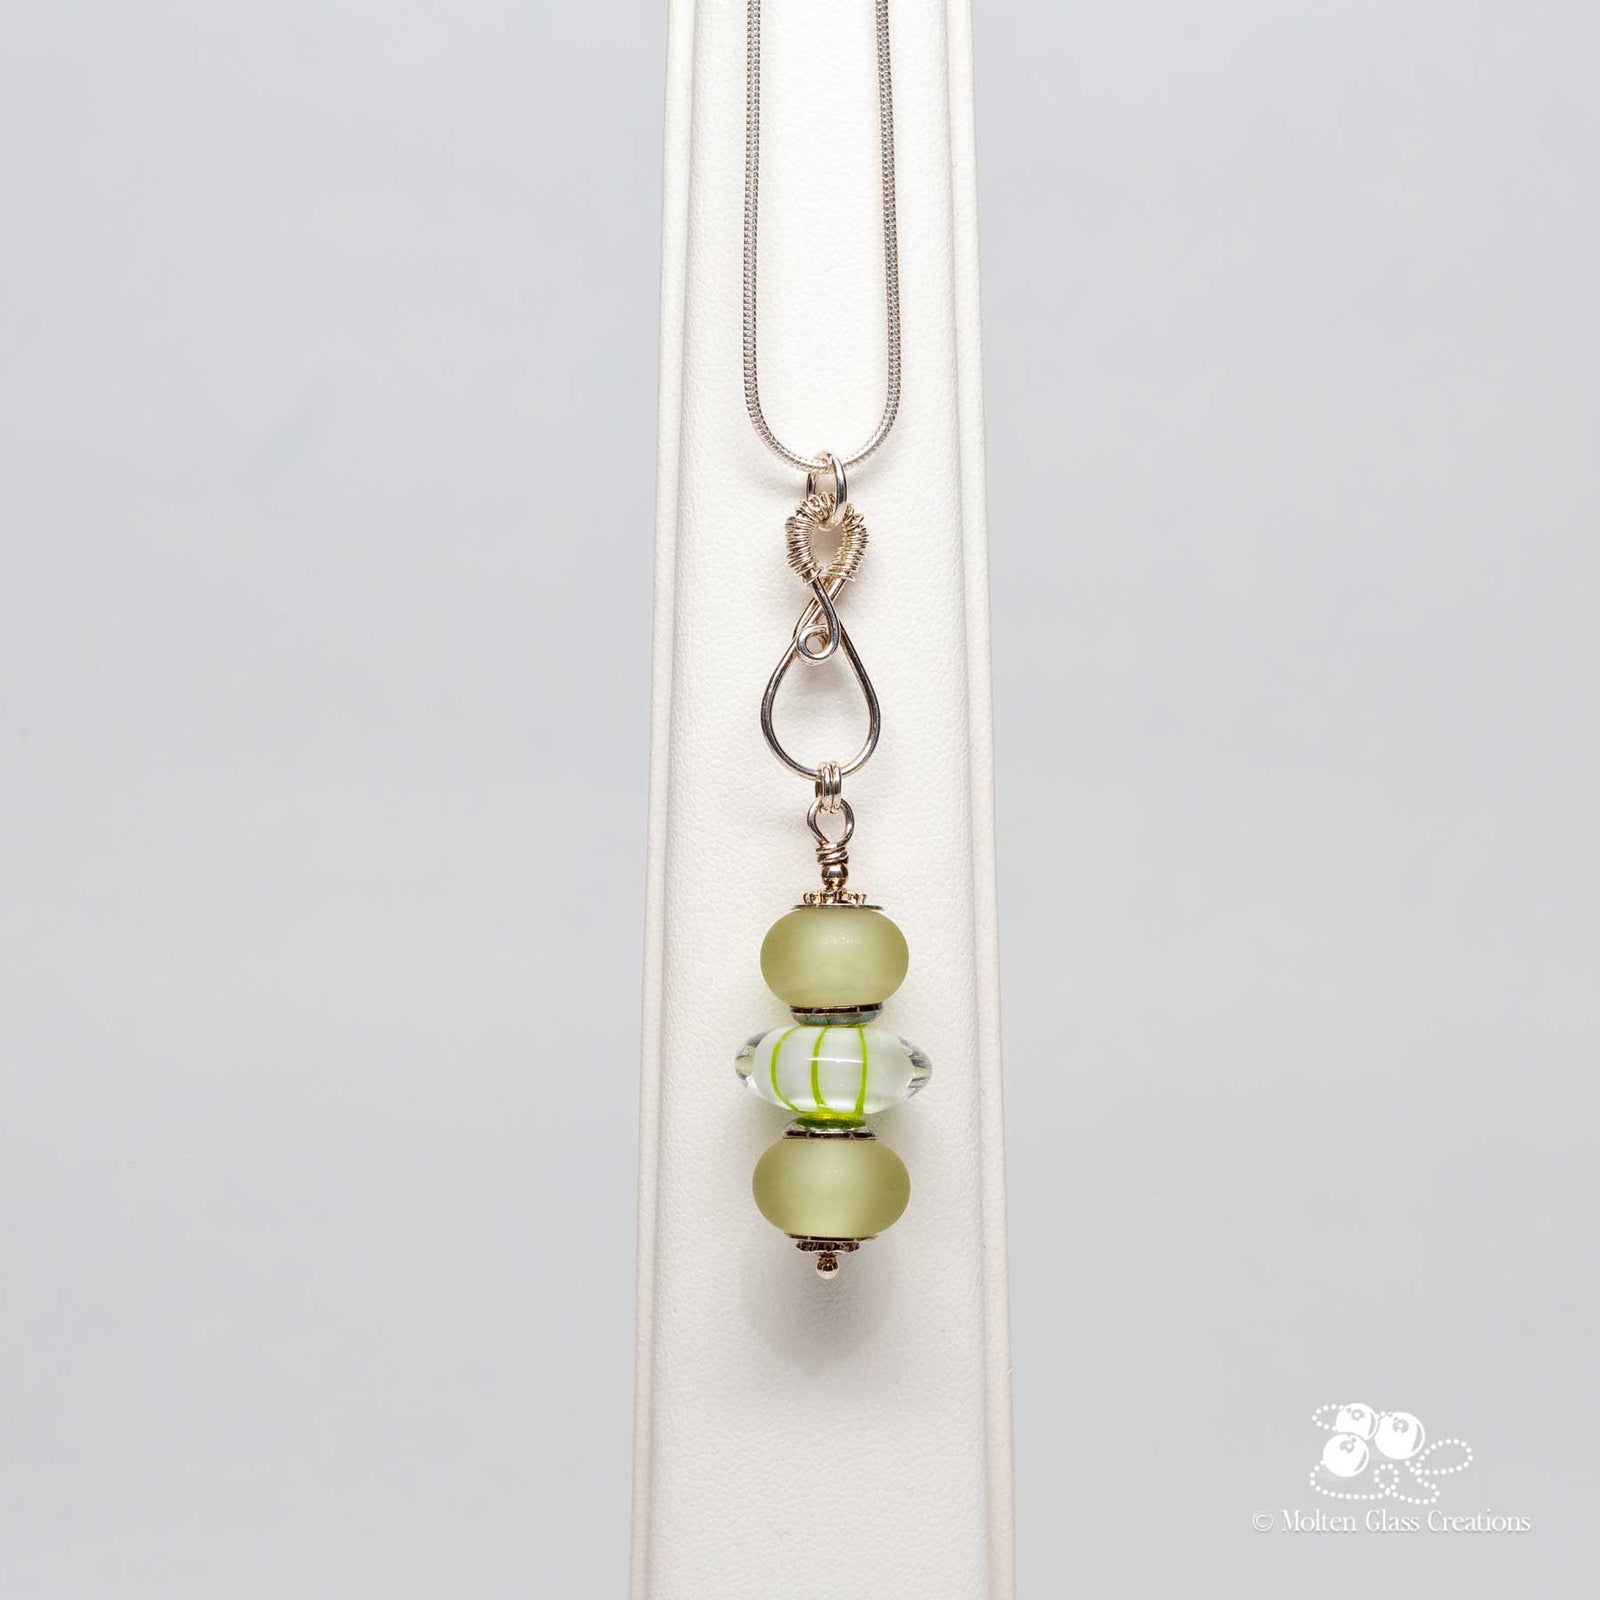 Mint Julep Small Green Beaded Necklace | Ben-Amun Jewelry